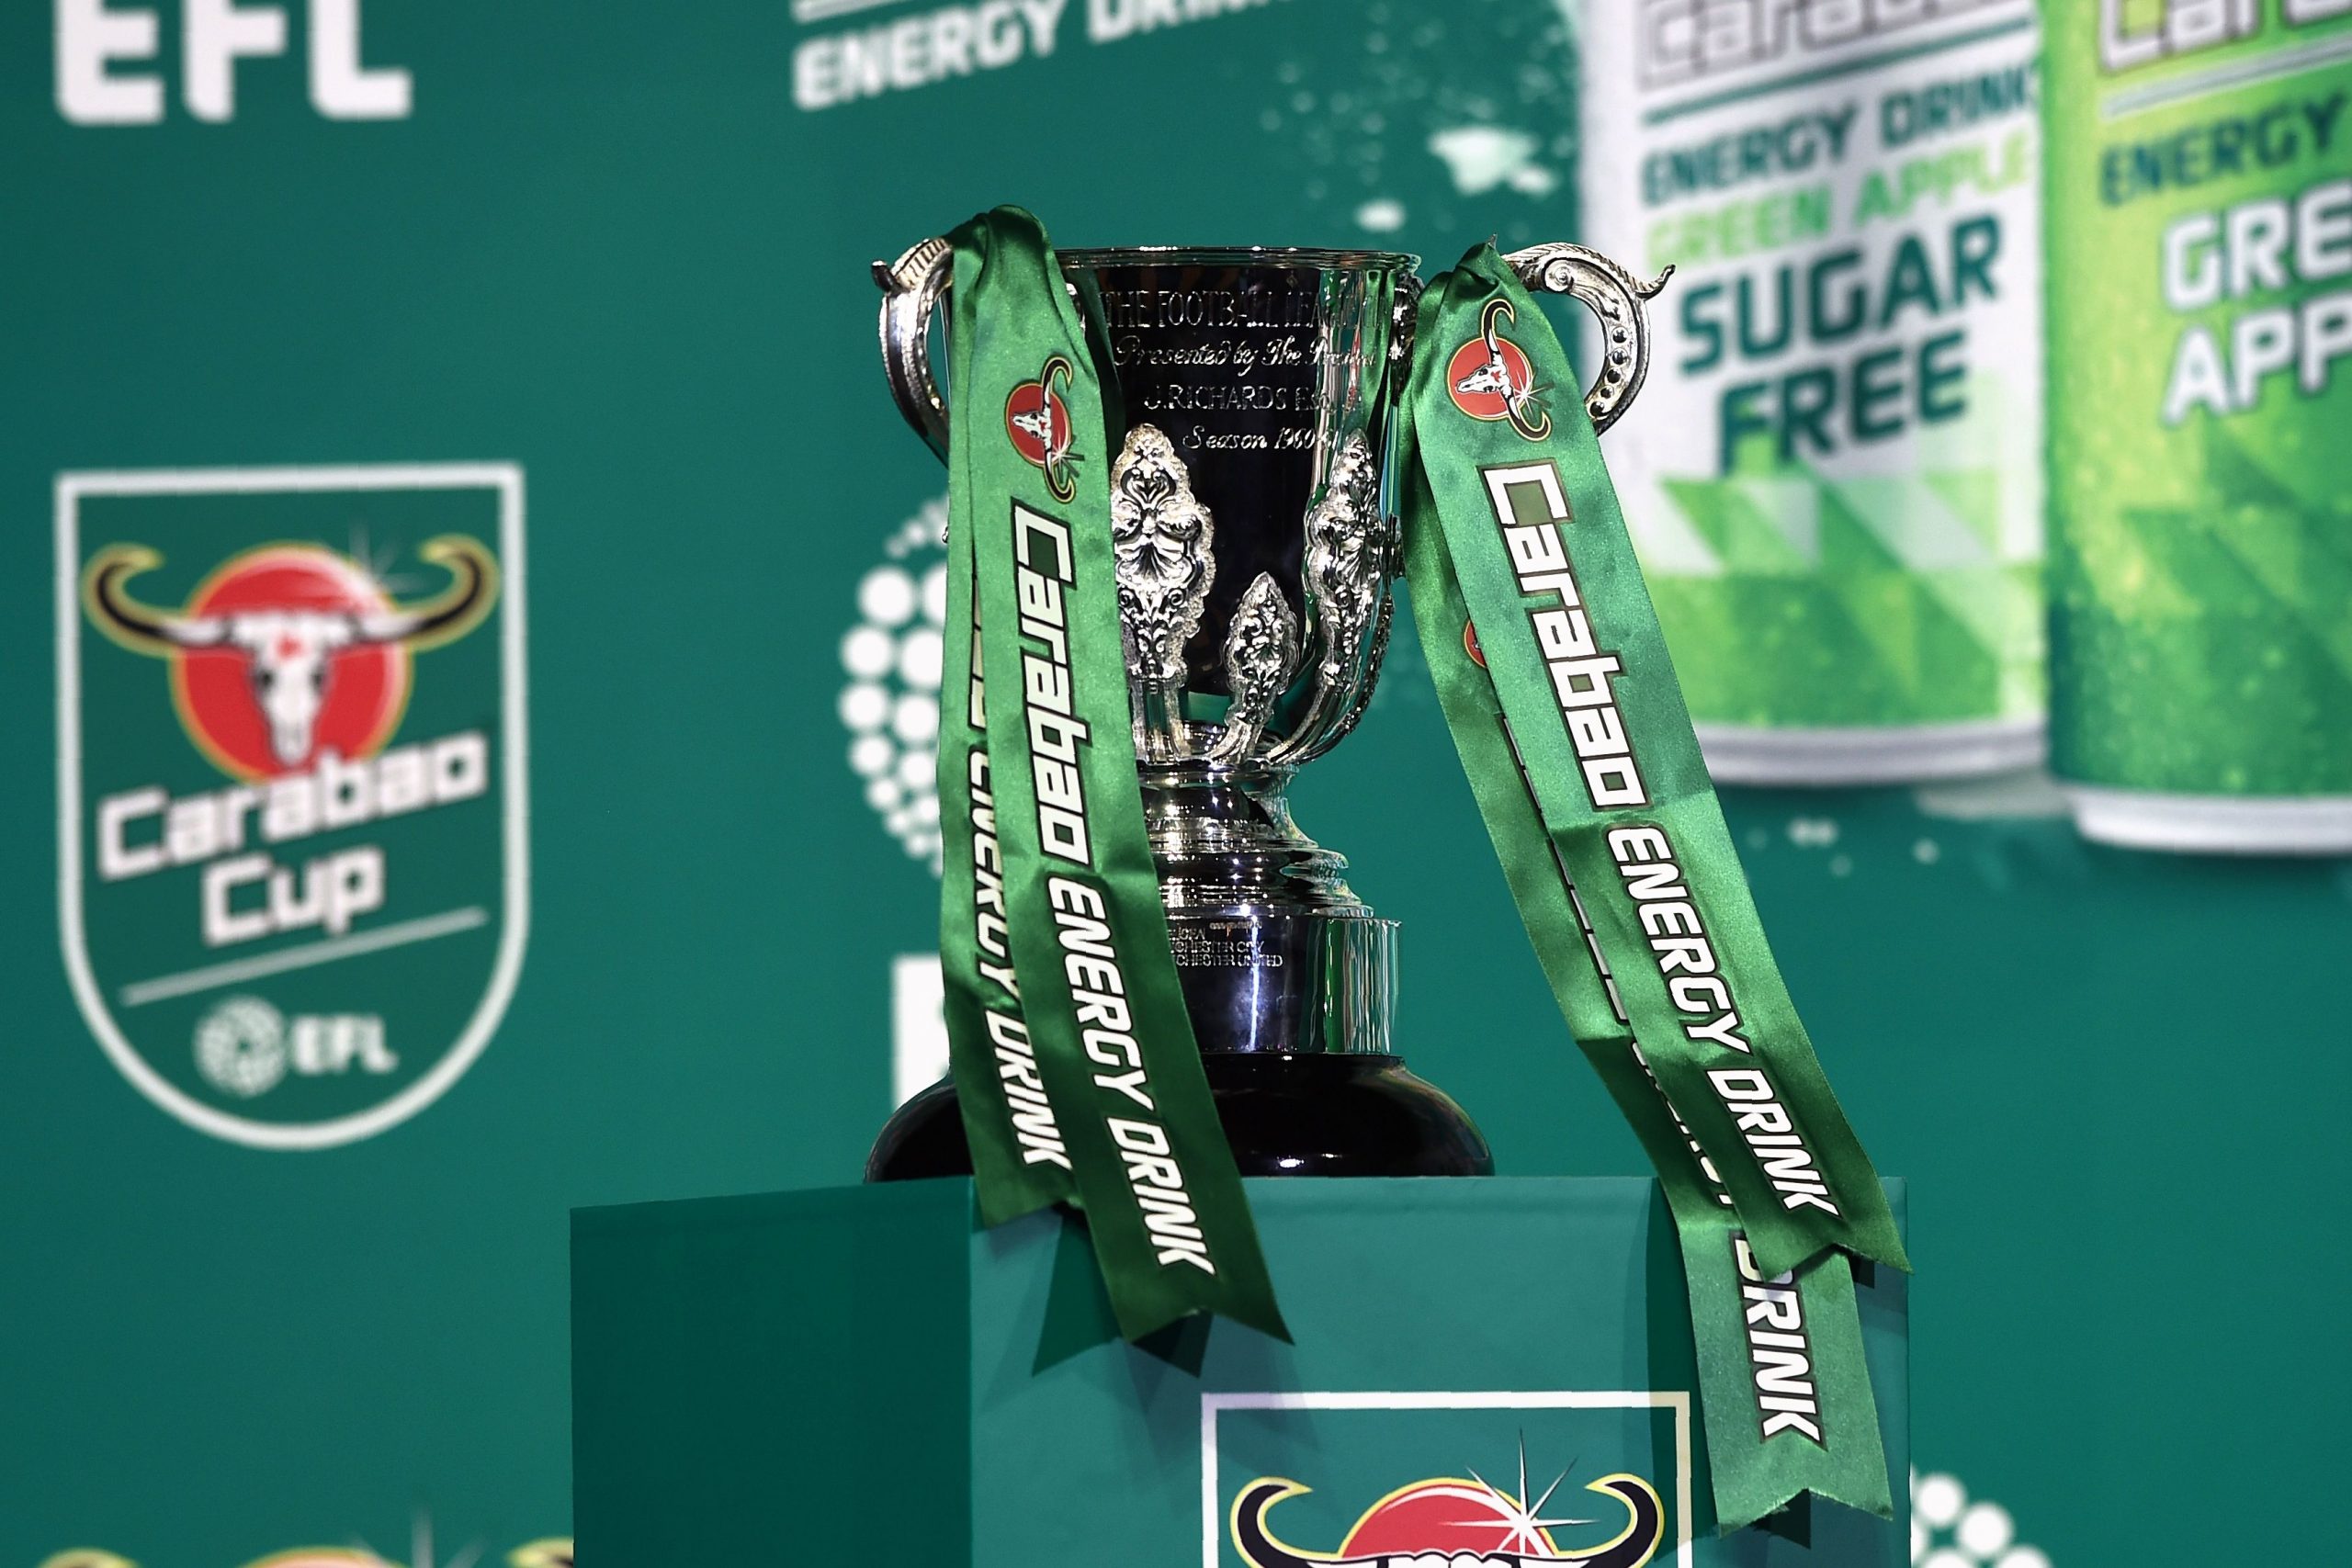 Manchester United will face Manchester City in the Carabao Cup semi-final scheduled to take place in January 2021. (GETTY Images)